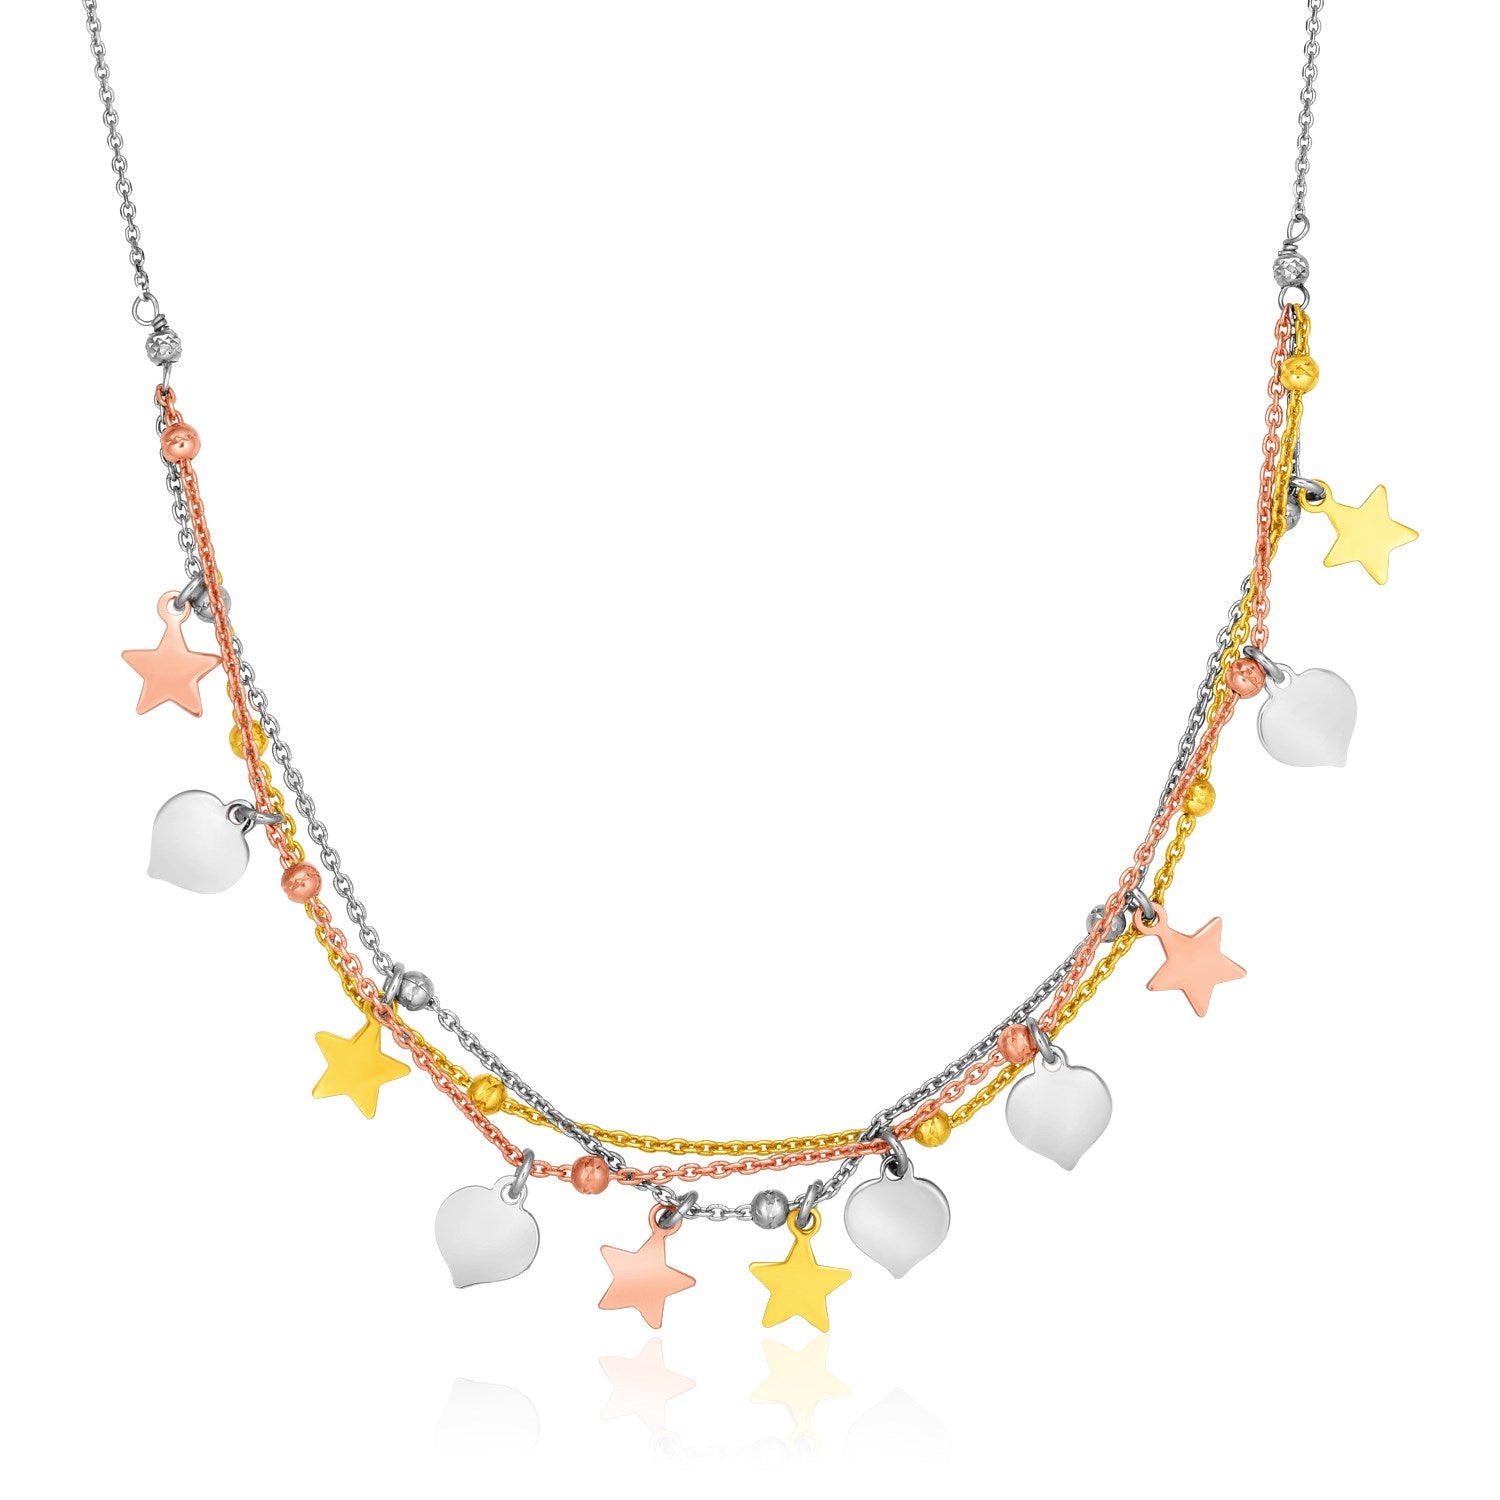 Sterling Silver 18 inch Three Toned Necklace with Polished Hearts and Stars